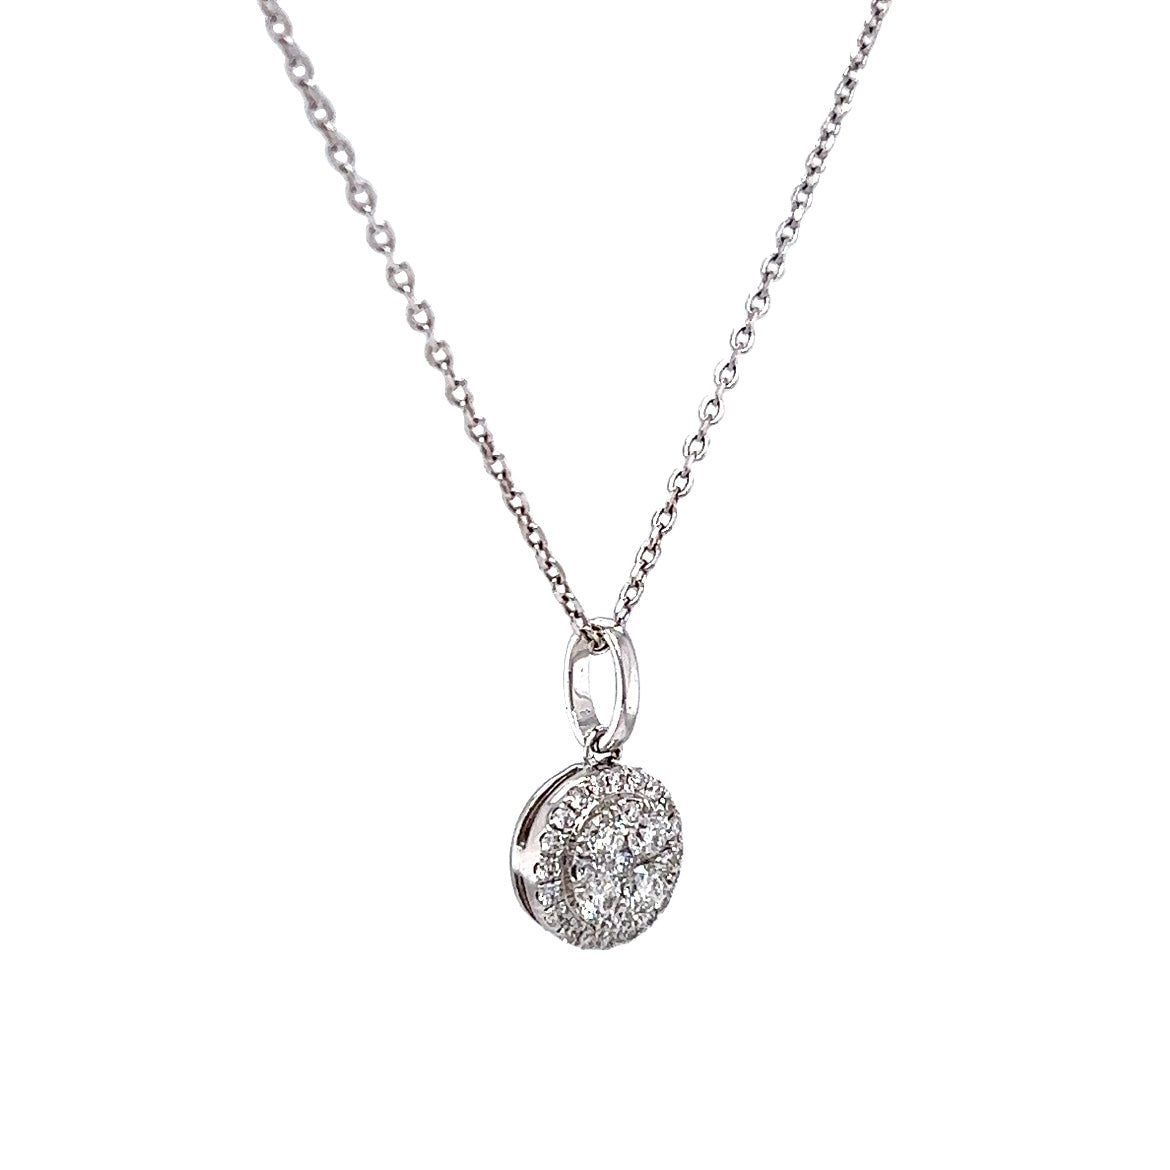 .26 Round Pave Diamond Pendant Necklace in 14k White Gold